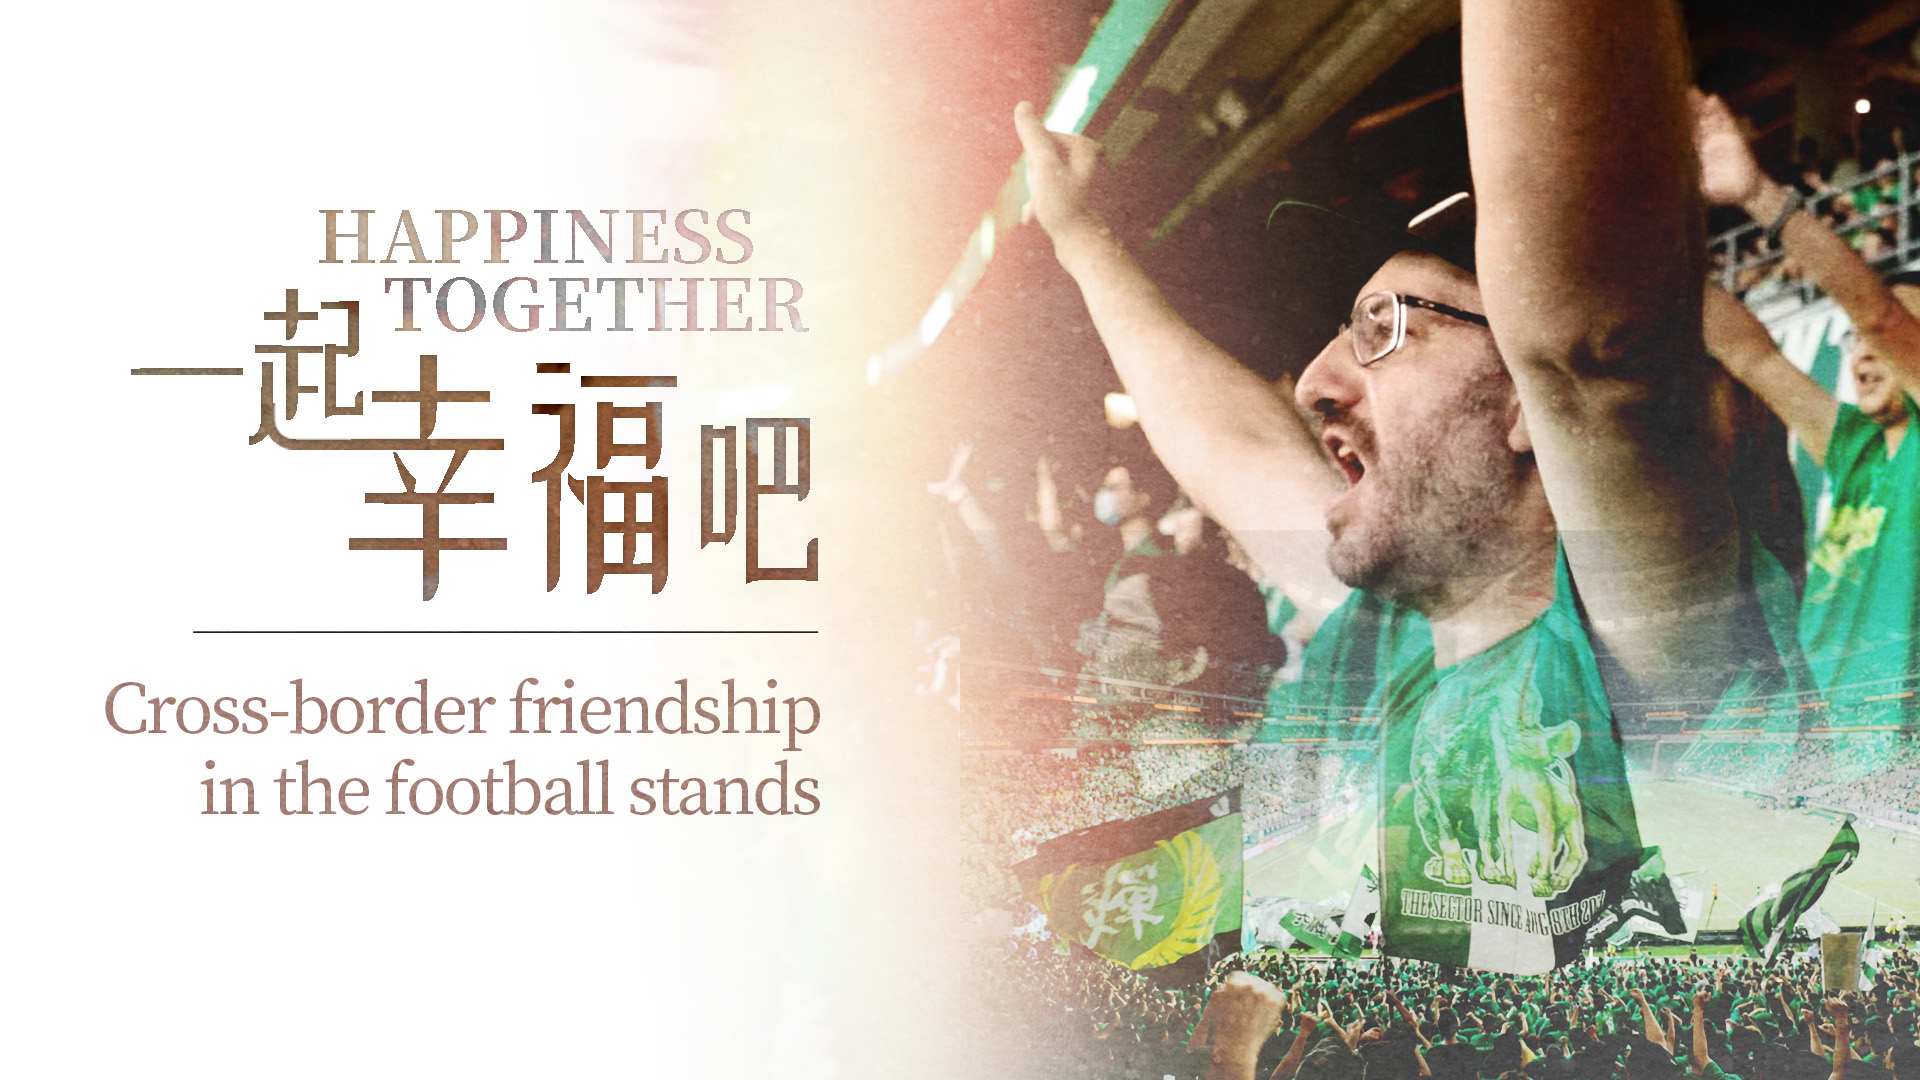 Happiness Together: Cross-border friendship in the football stands